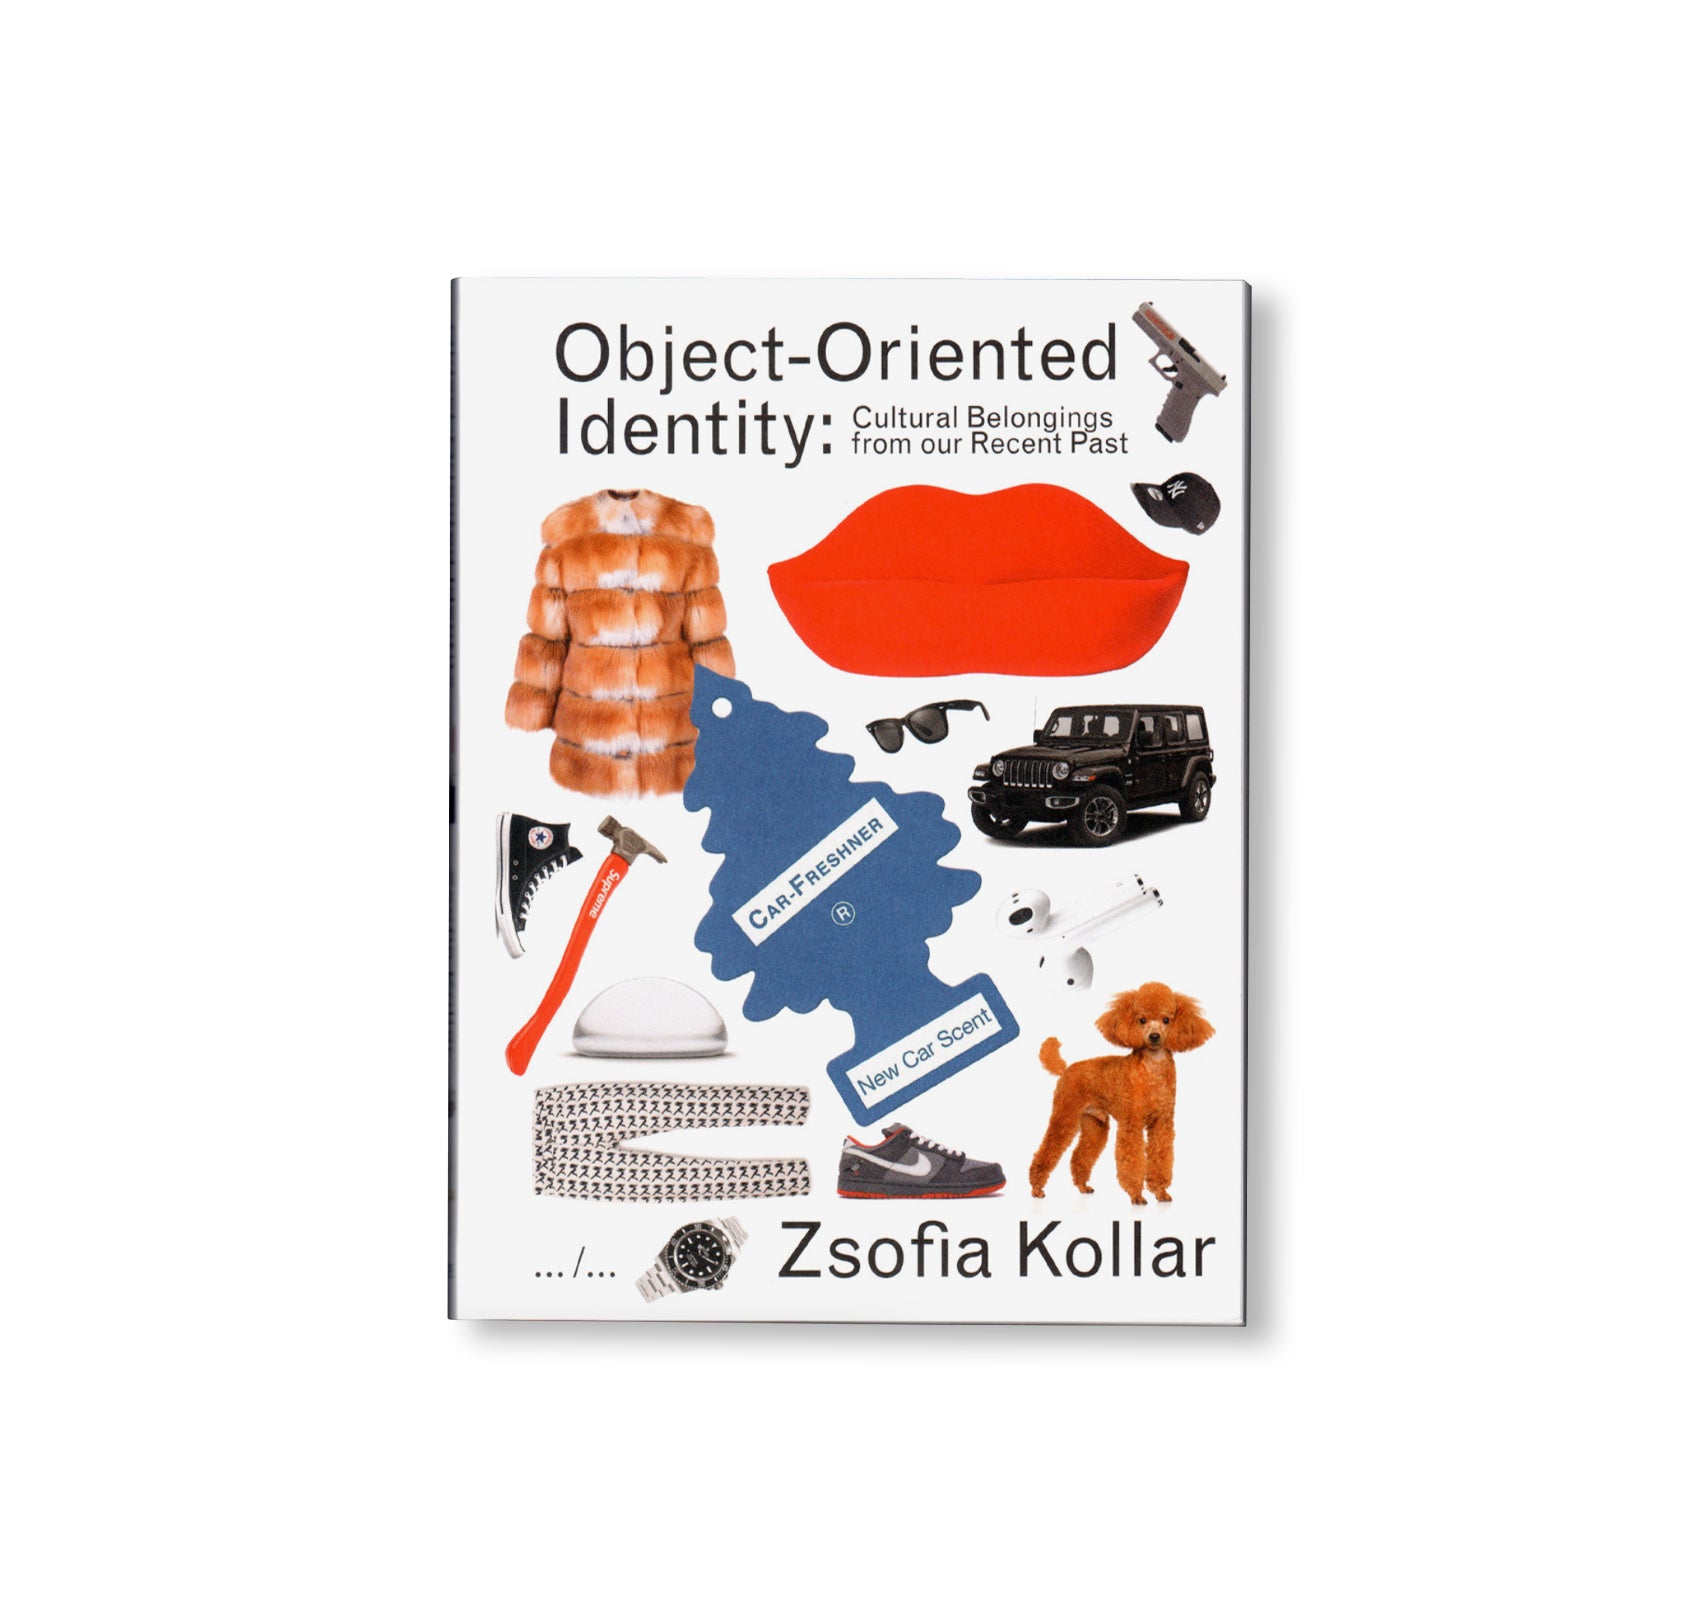 OBJECT-ORIENTED IDENTITY: CULTURAL BELONGINGS FROM OUR RECENT PAST by Zsofia Kollar